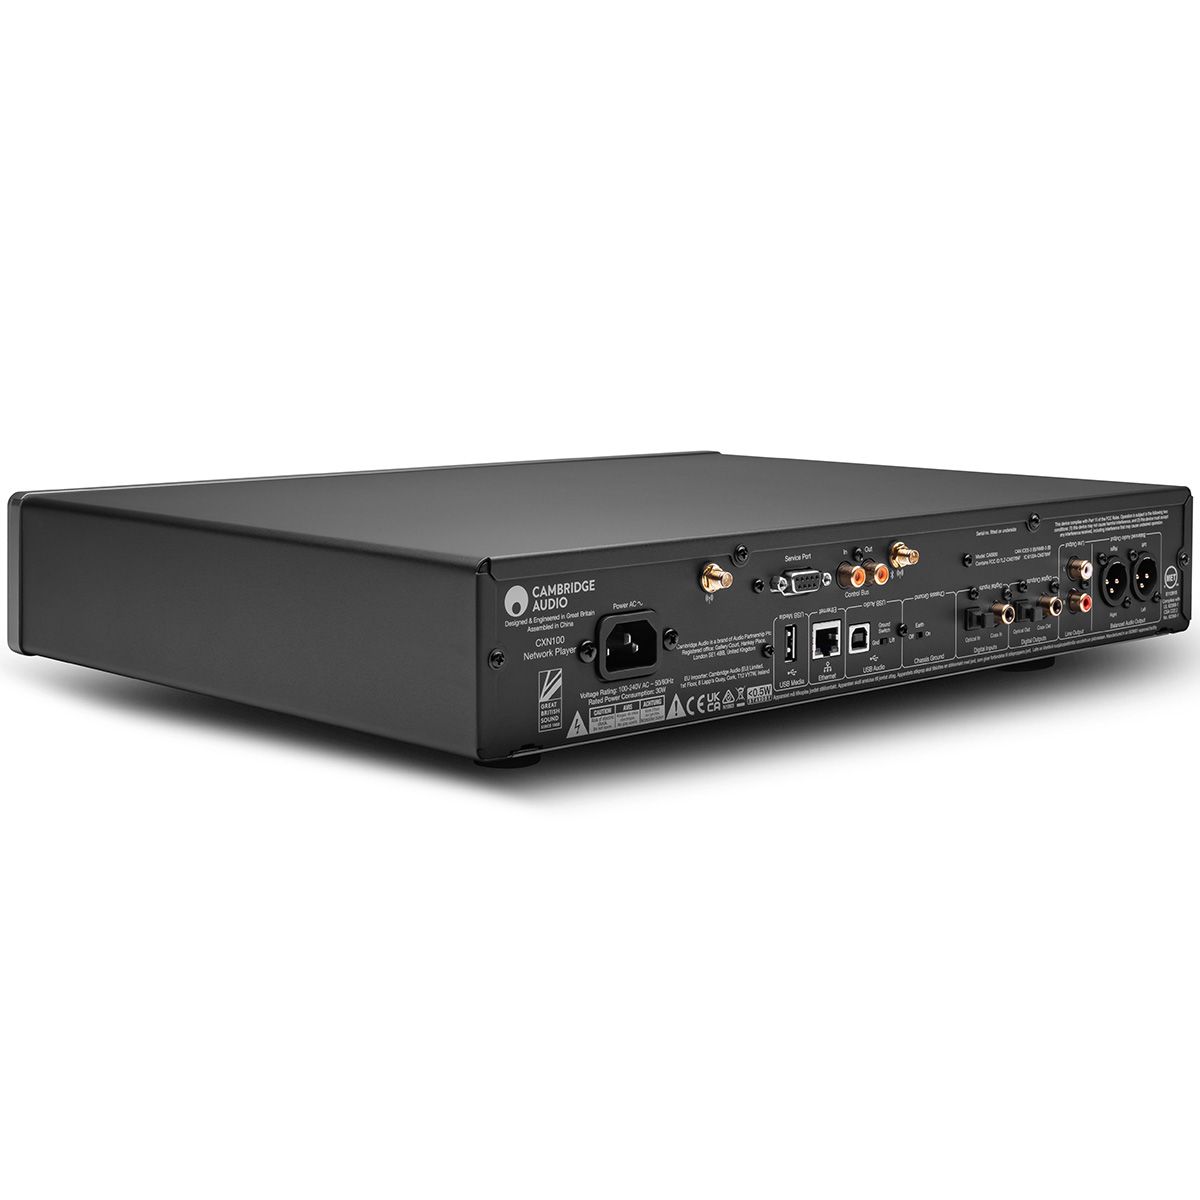 Cambridge CXN100 Network Player - Lunar Grey angled left rear view